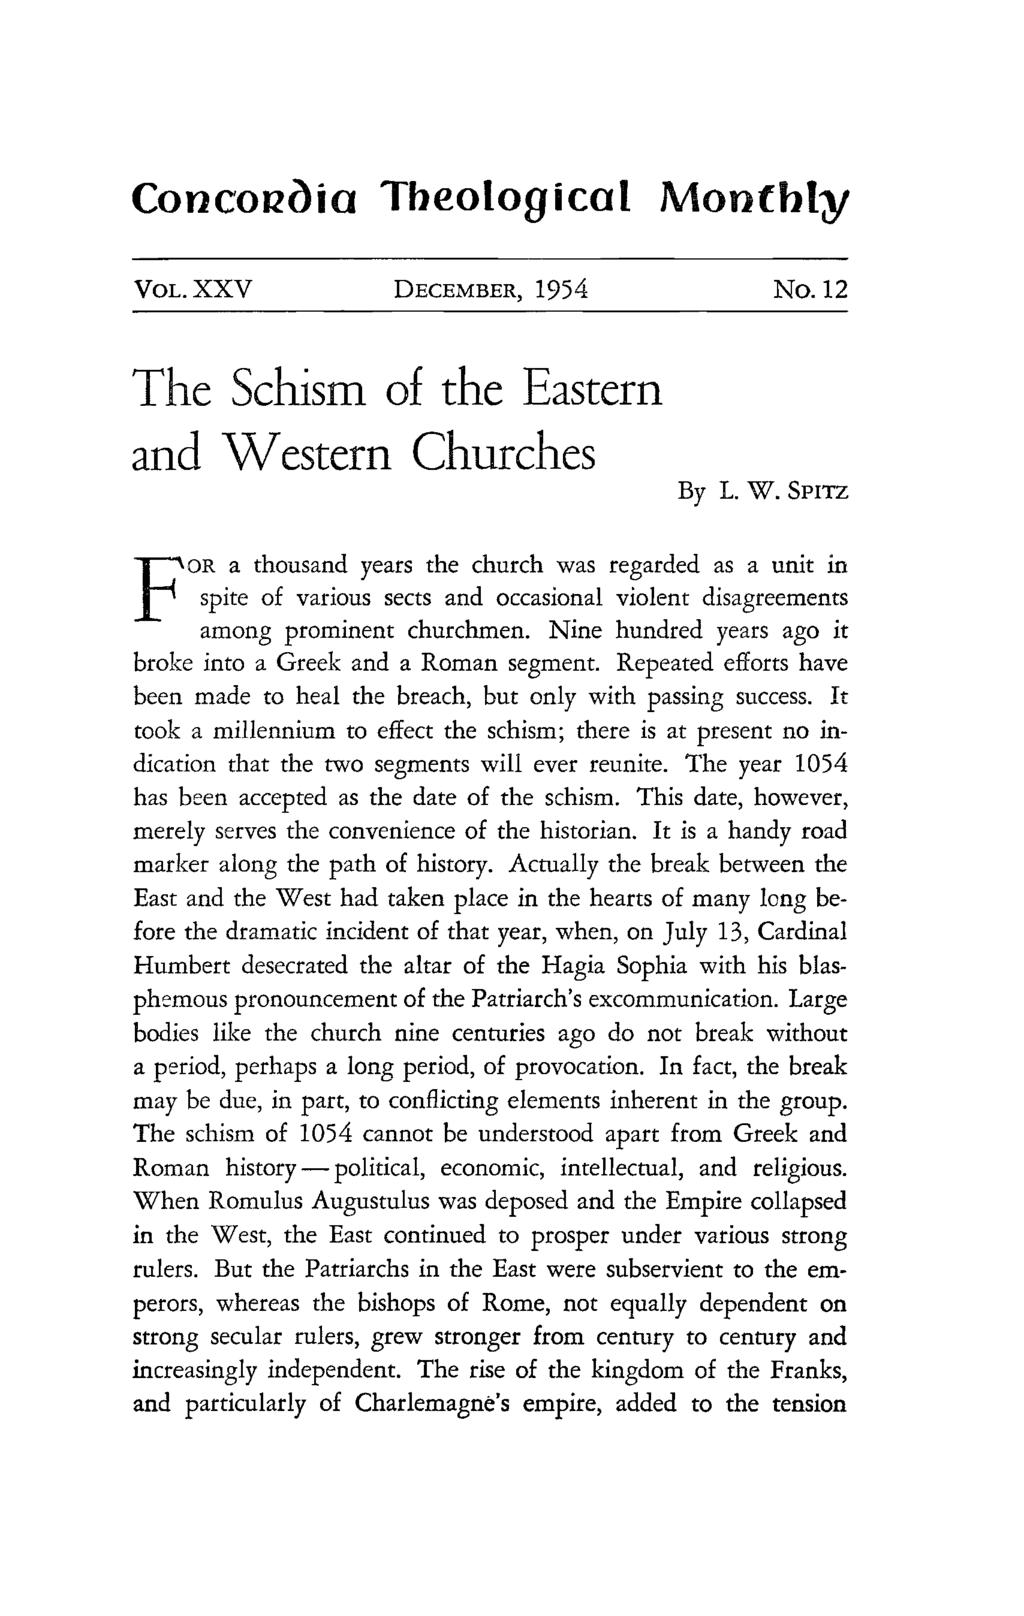 Concol2~ia Theological Monthly VOL. xxv DECEMBER, 1954 No. 12 The Schism of the Easterr. and N estern Churches By L. W.